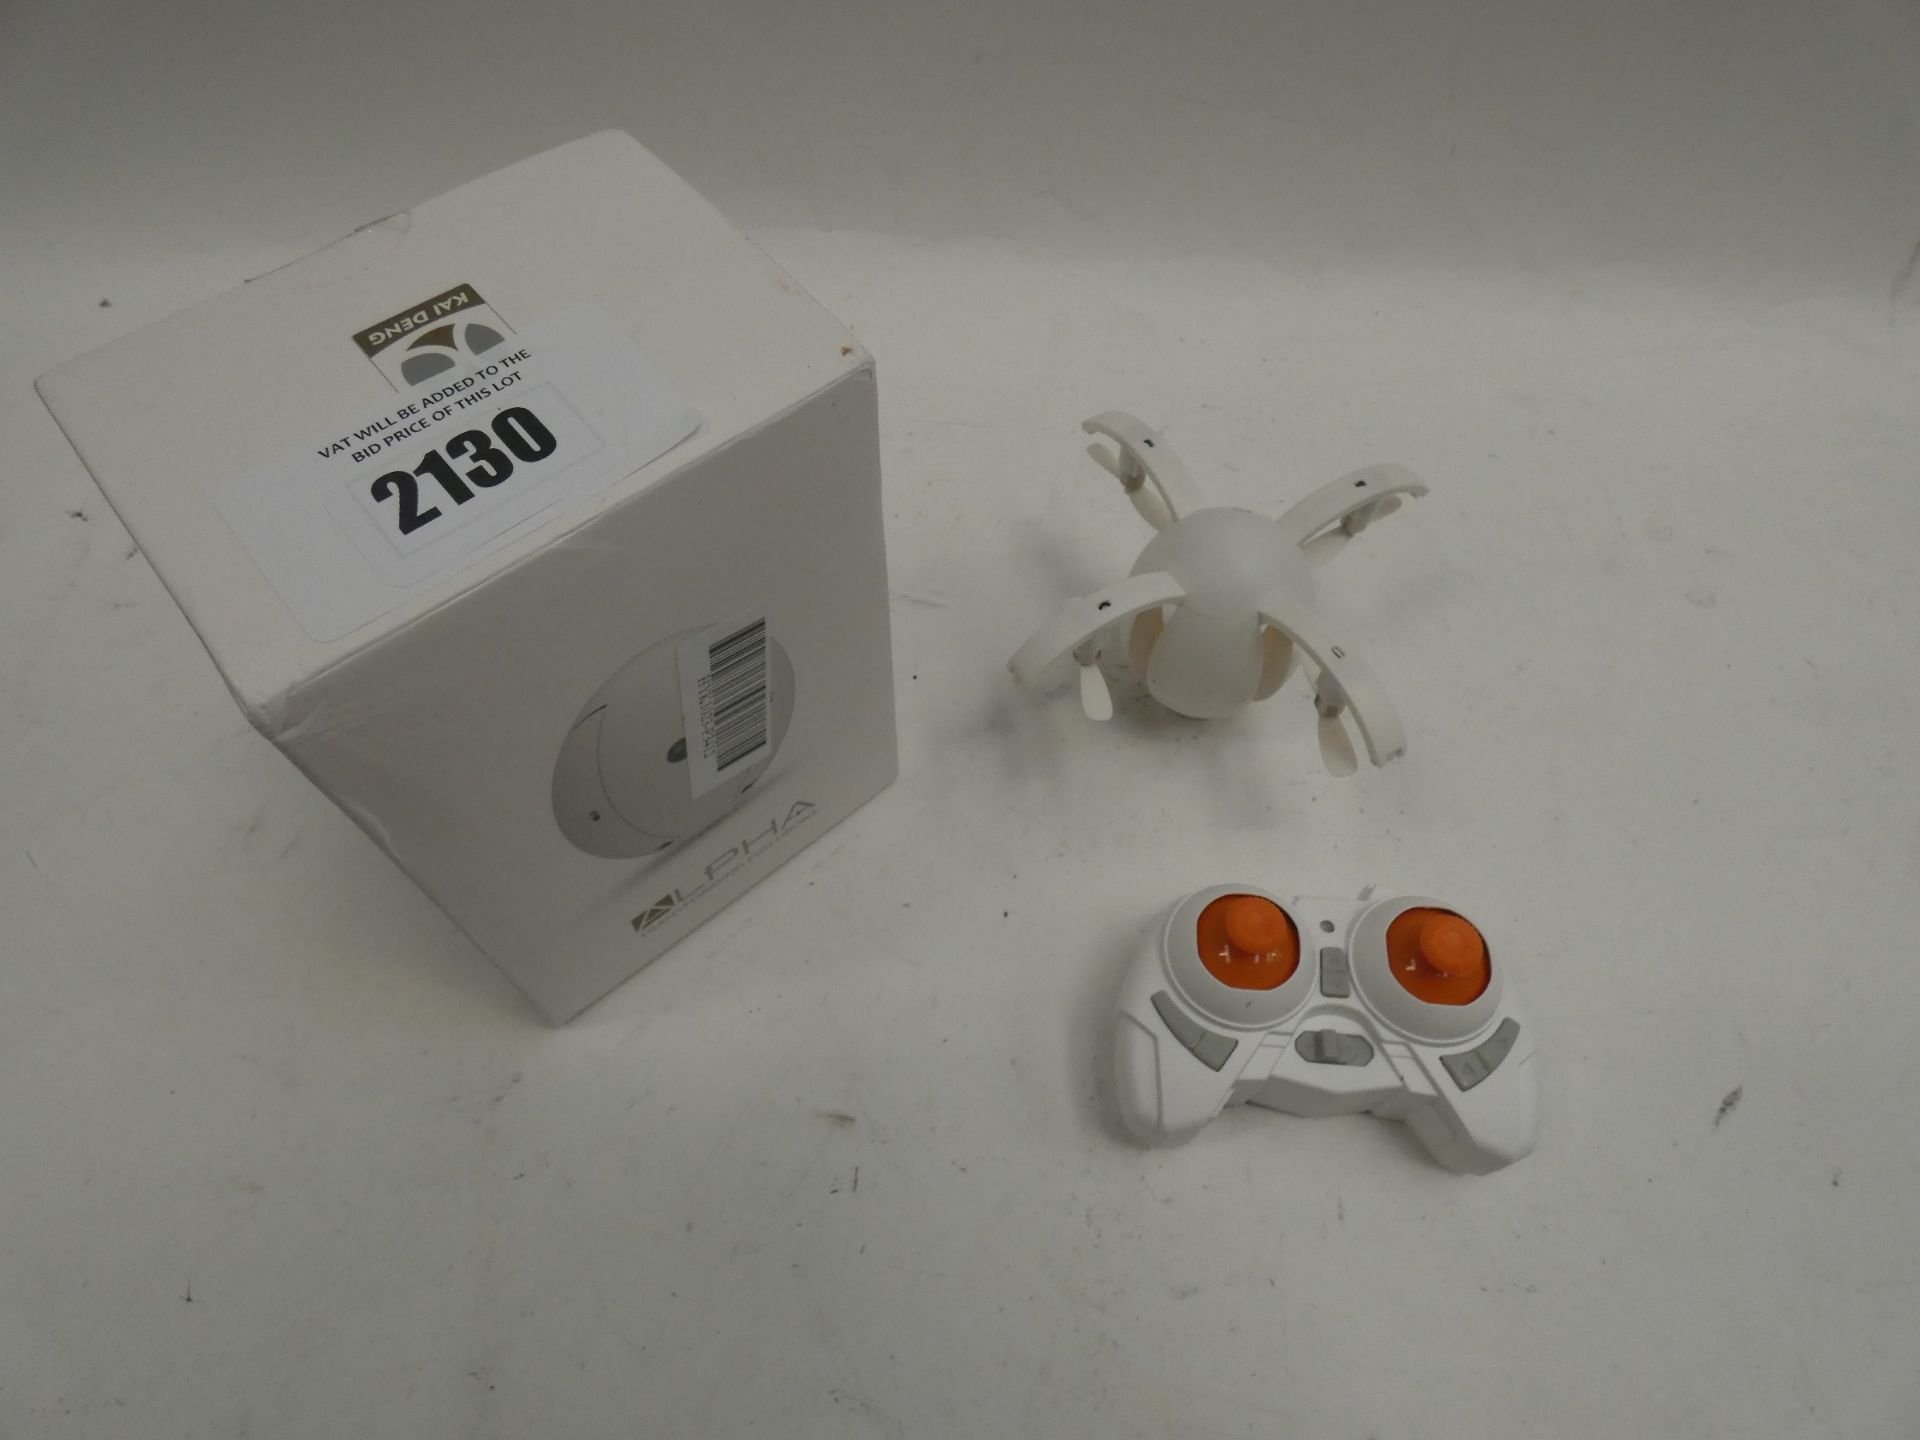 Alpha egg shaped drone with controller and box.